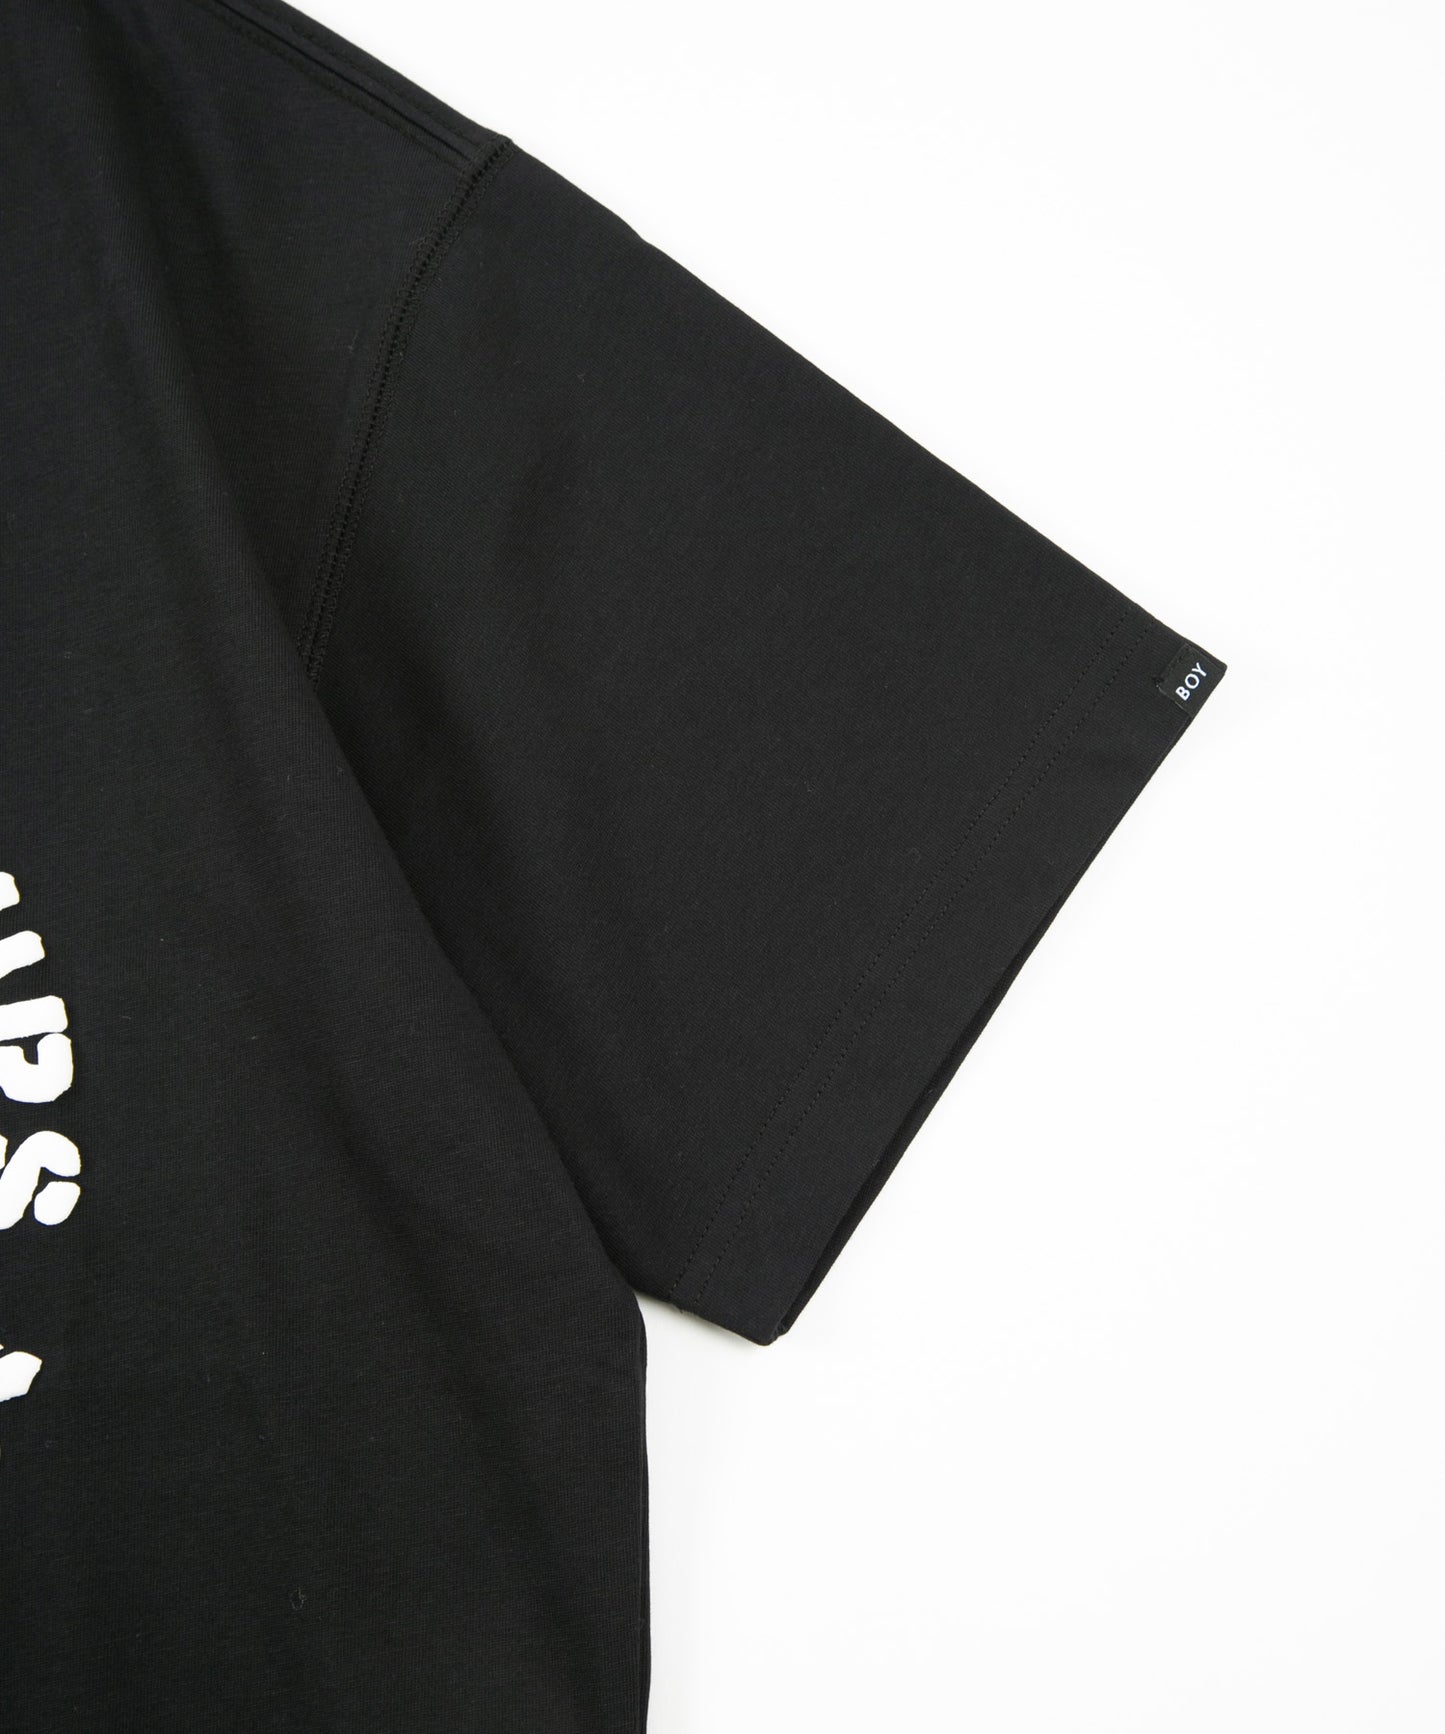 「THE FUTURE IS OURS」 TEE BLACK【AFJ-T230302】